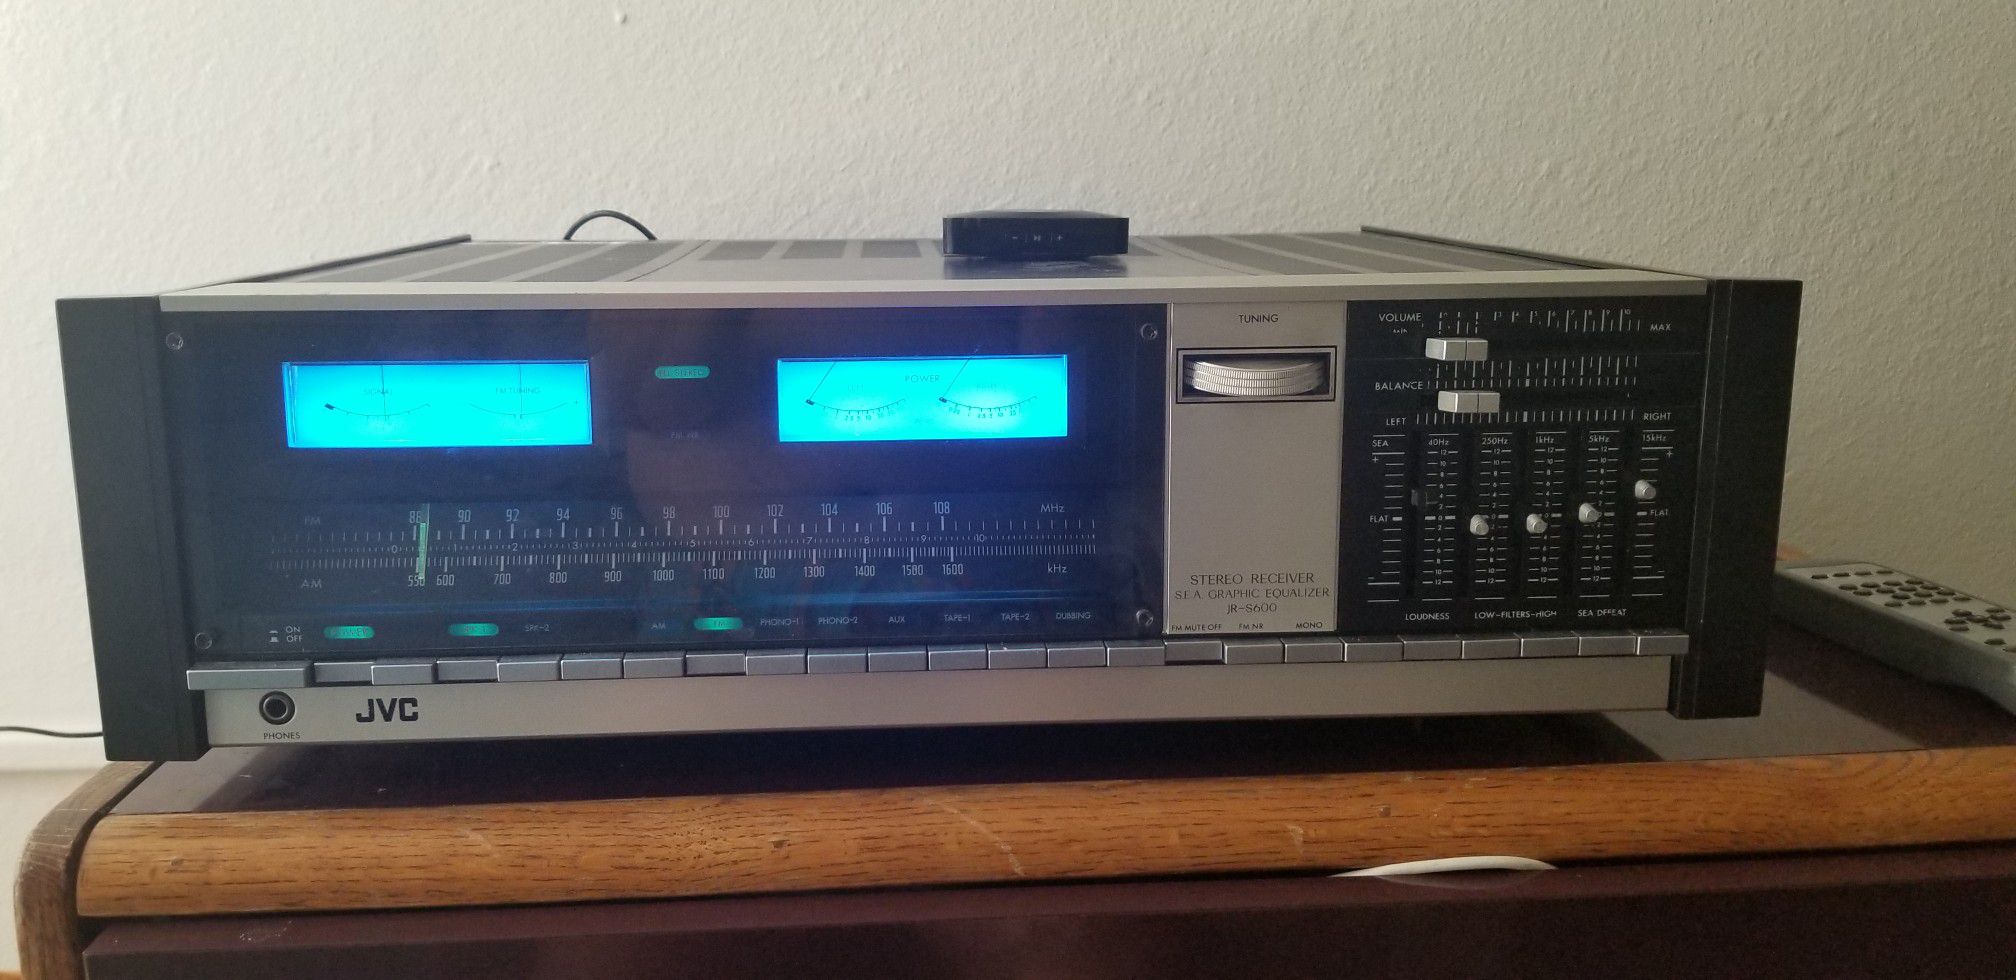 JVC STEREO RECEIVER S.E.A. Graphic Equalizer JR-S600 110W/RMS Channel